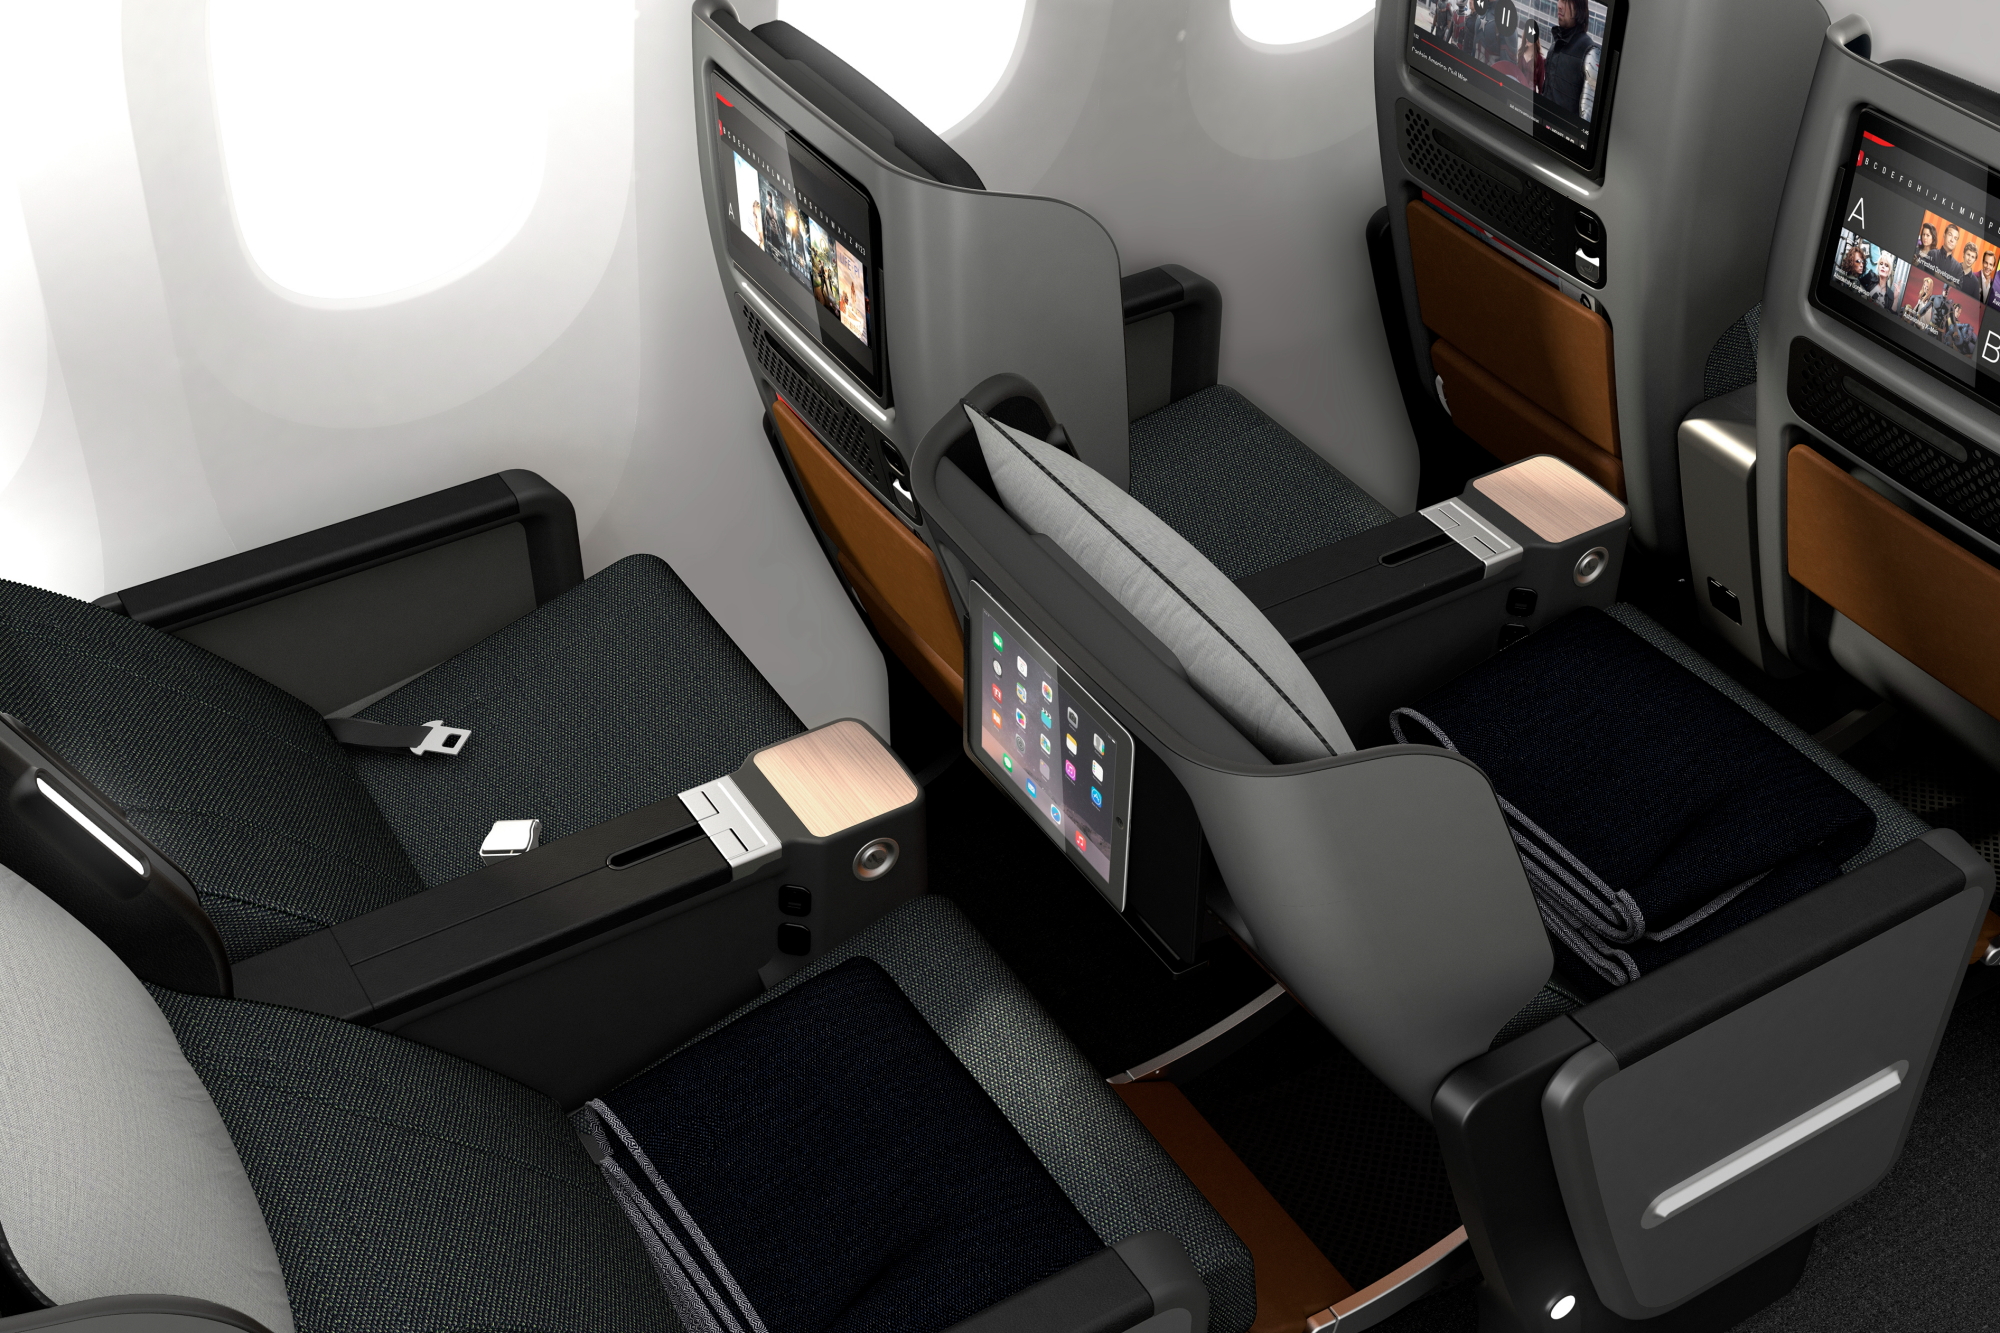 Qantas has reached an agreement with Airbus to upgrade its 12 Airbus A380 cabins. Click to enlarge.